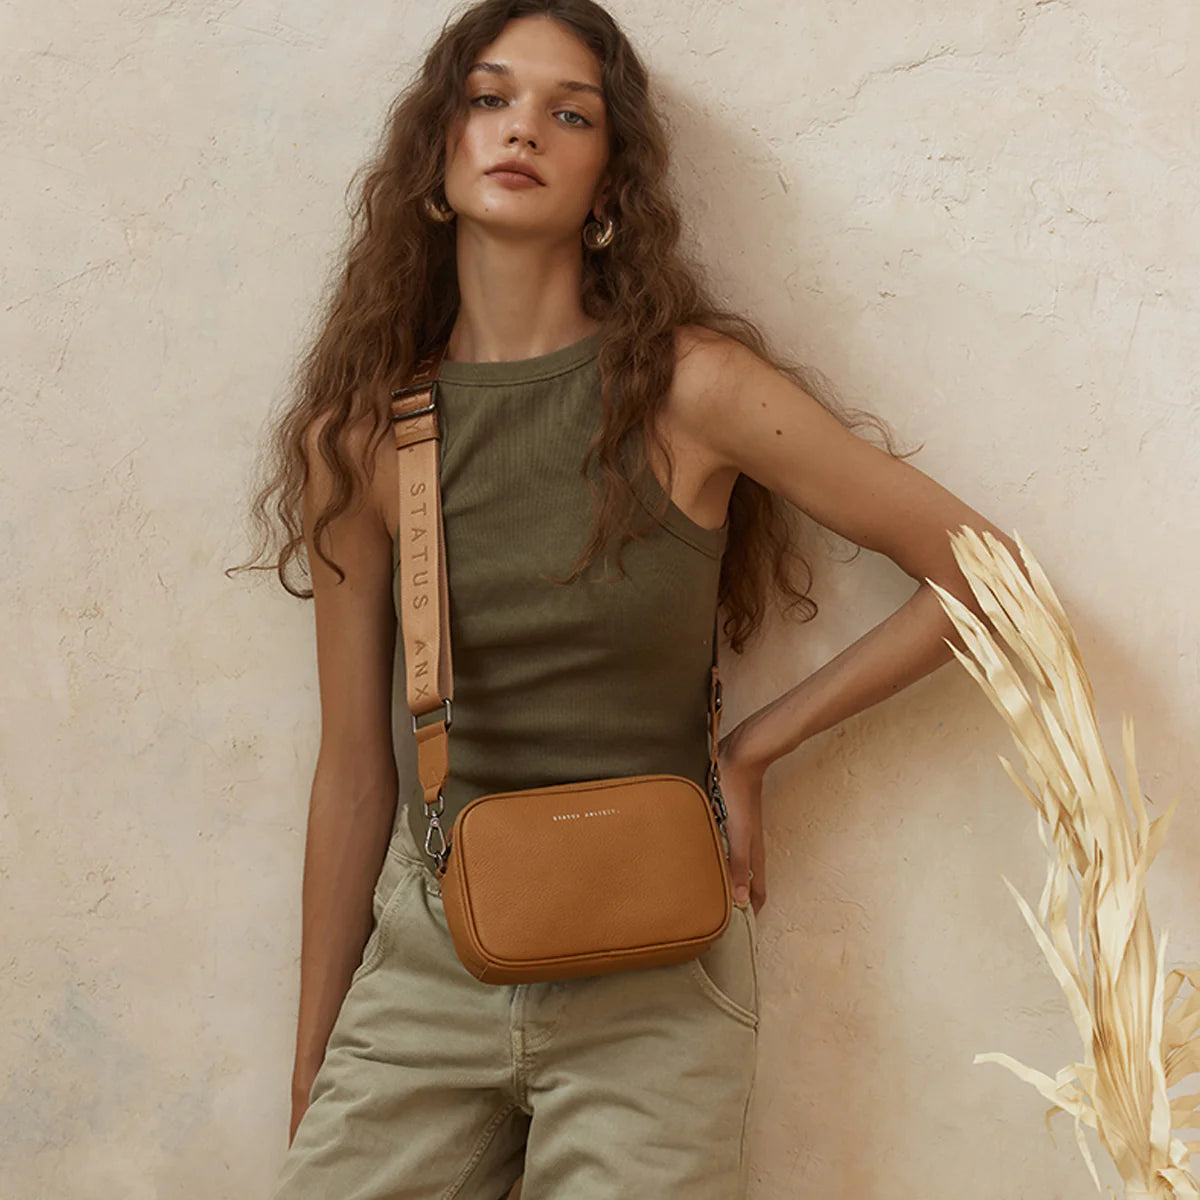 Plunder Leather Bag with Webbed Strap in Tan